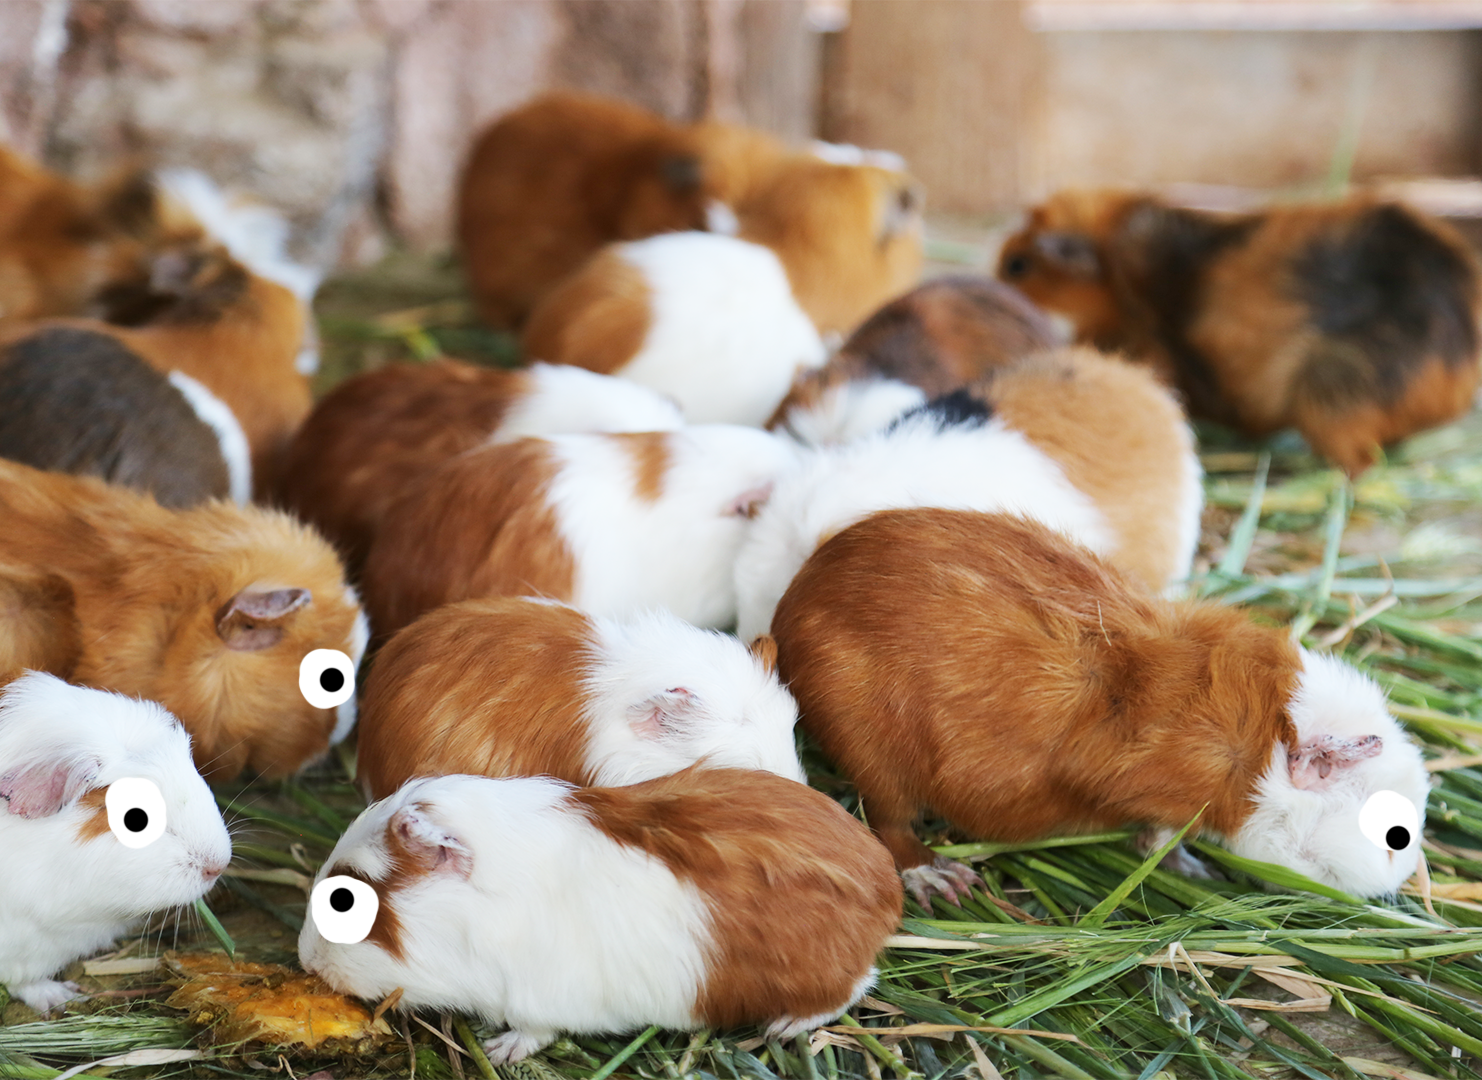 A group of Guinea Pigs